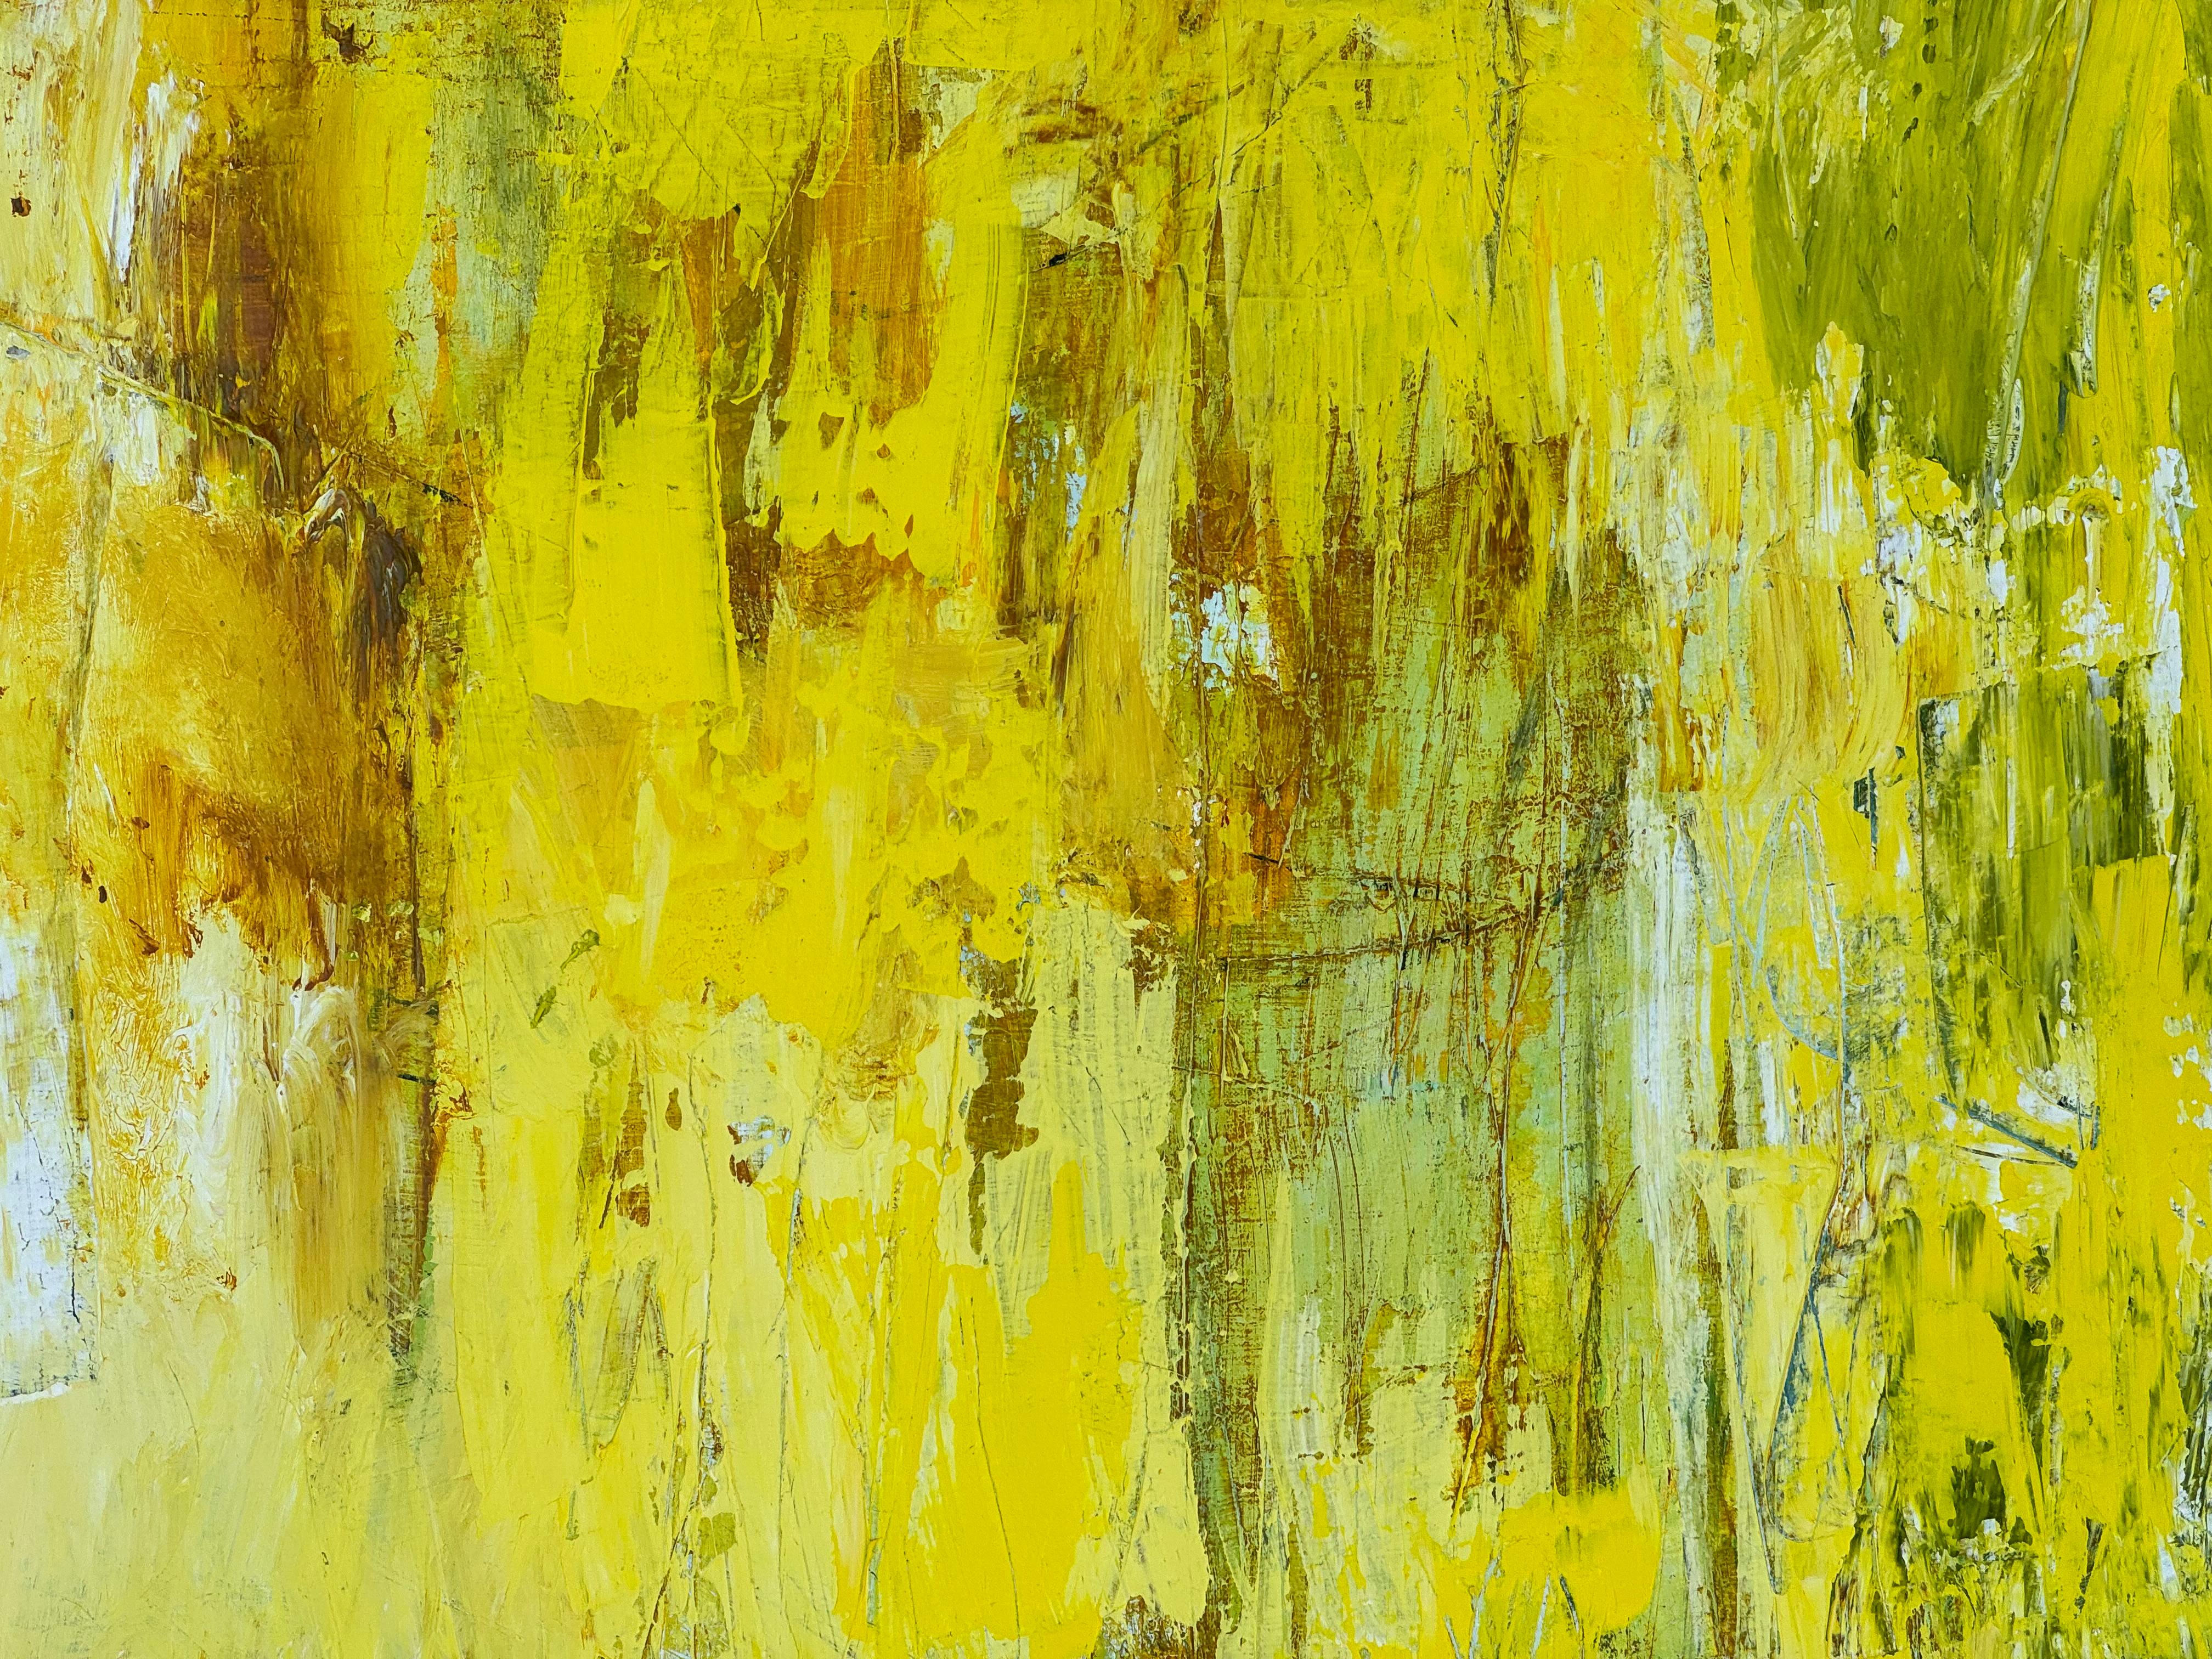 Large Beth Donahue Abstract Oil On Canvas Painting, 21st century. . This painting is a part of her 